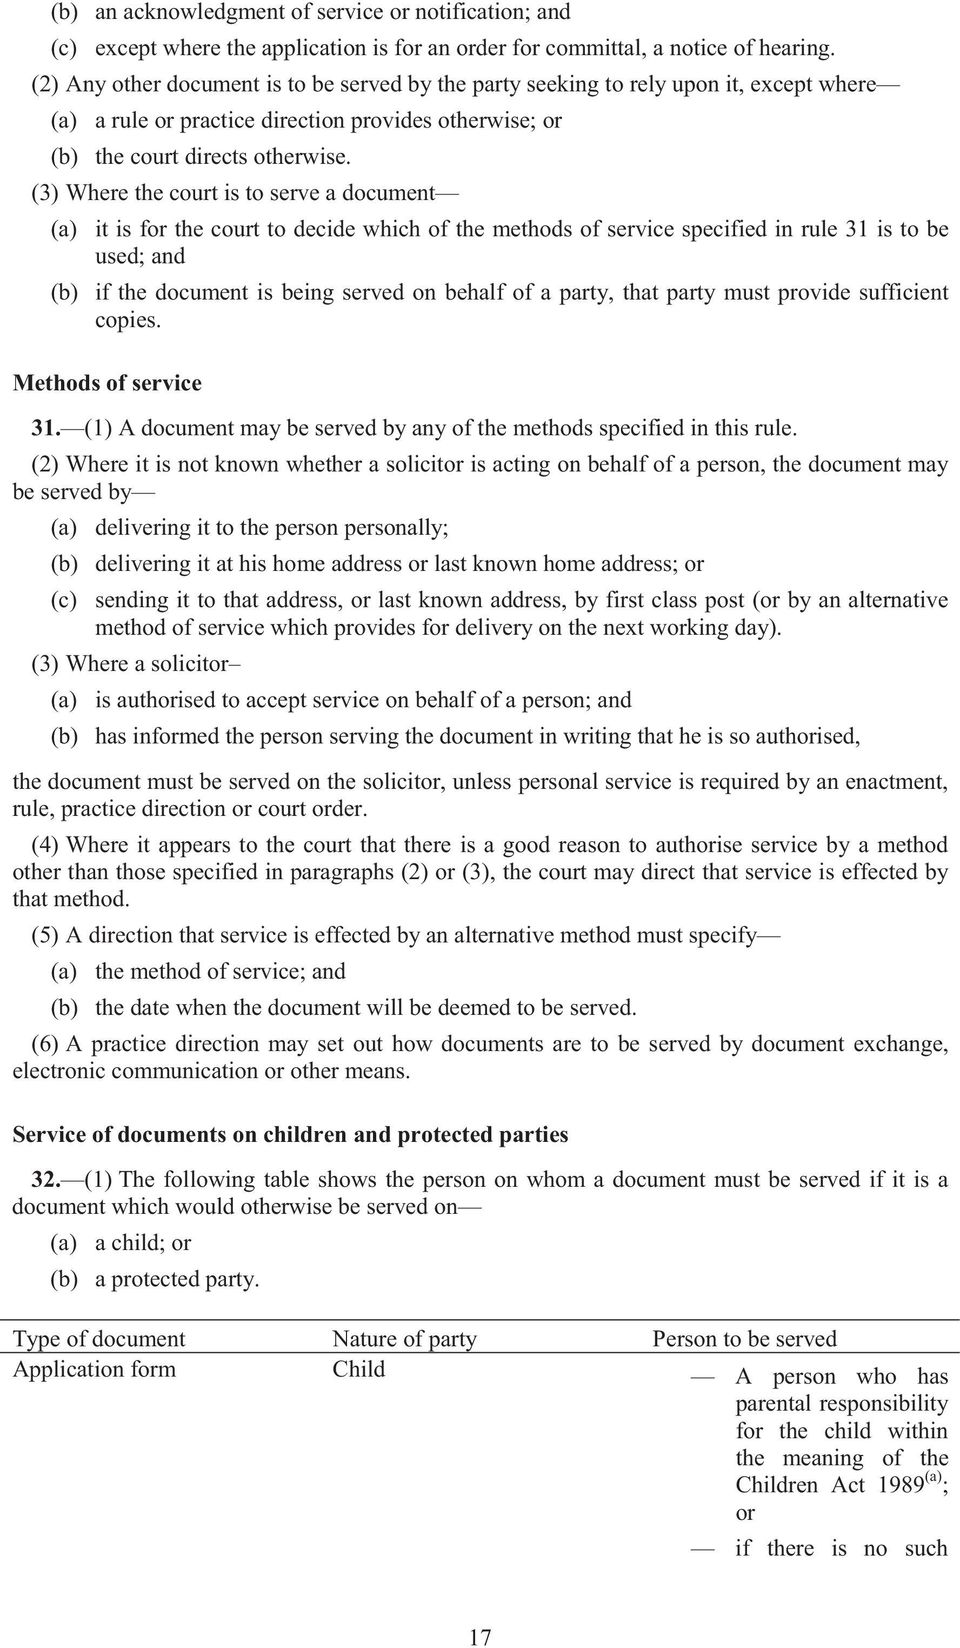 (3) Where the court is to serve a document (a) it is for the court to decide which of the methods of service specified in rule 31 is to be used; and (b) if the document is being served on behalf of a